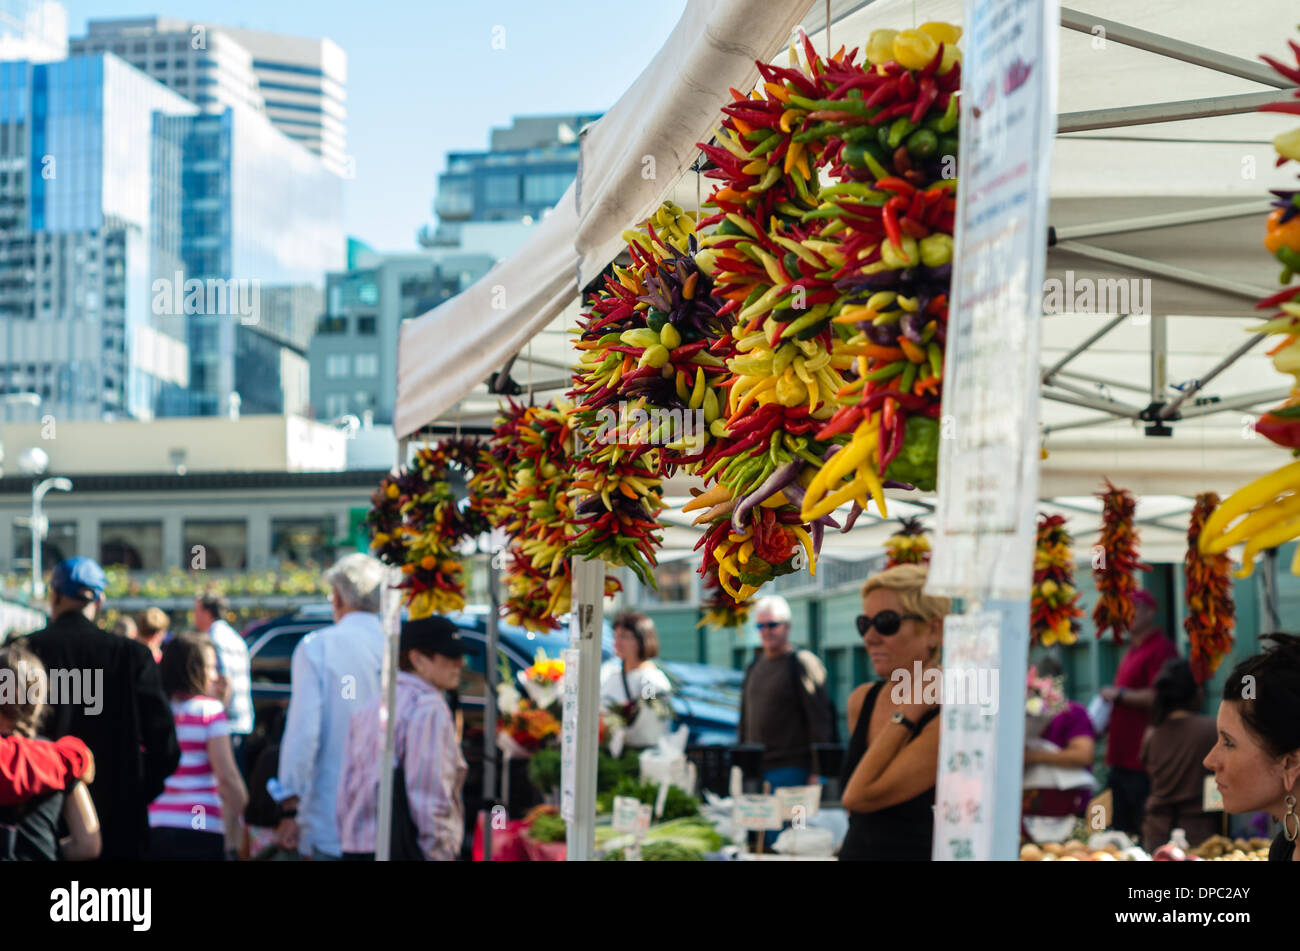 Shoppers with hot peppers strung on rope to dry at an open air market stall.  Pike Place Market, Seattle, Washington Stock Photo